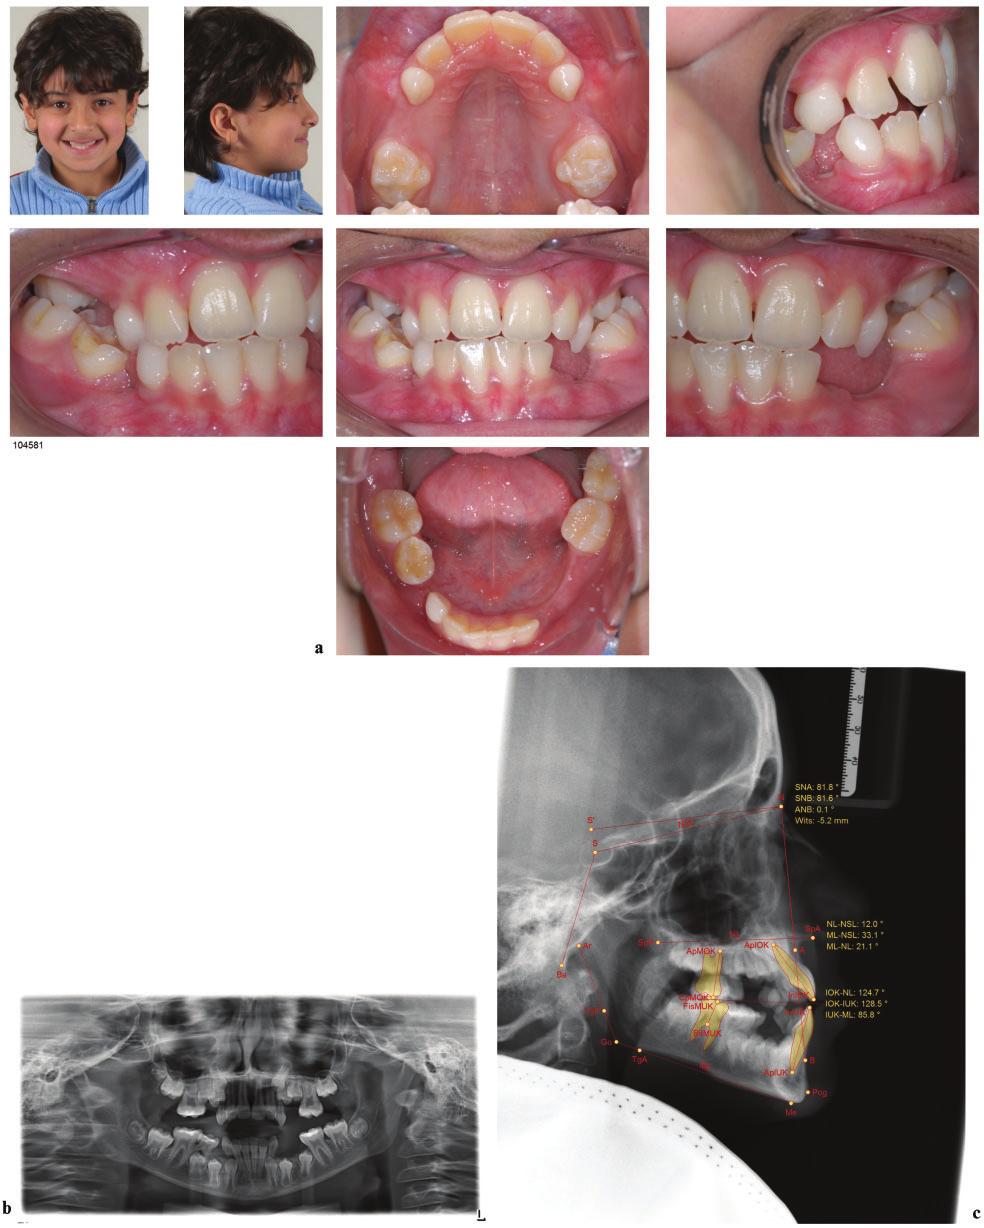 JO September 2014 Mini-implant Supplement Hybrid Hyrax Distalizer S49 Figure 2 (a) 10-year-old male patient with a severe Class III malocclusion, early loss of the